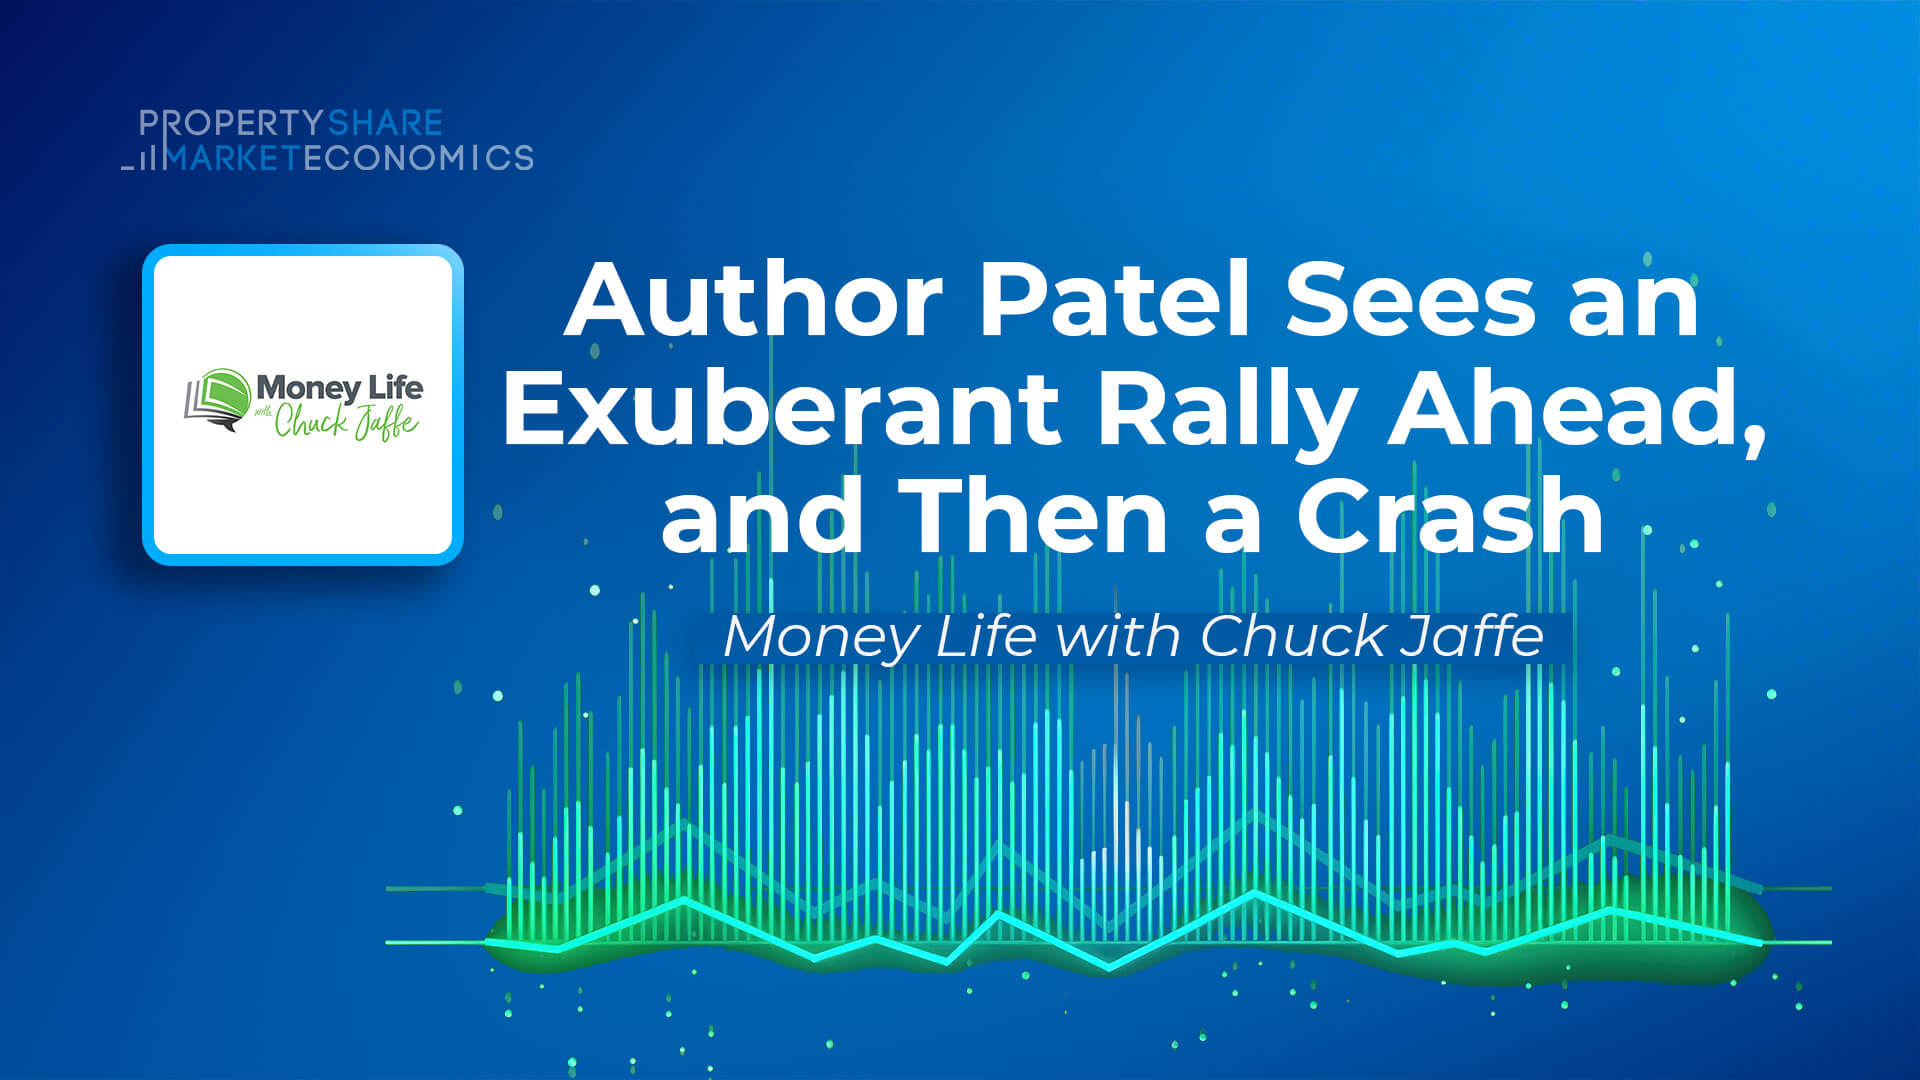 Author Patel Sees an Exuberant Rally Ahead and then a Crash